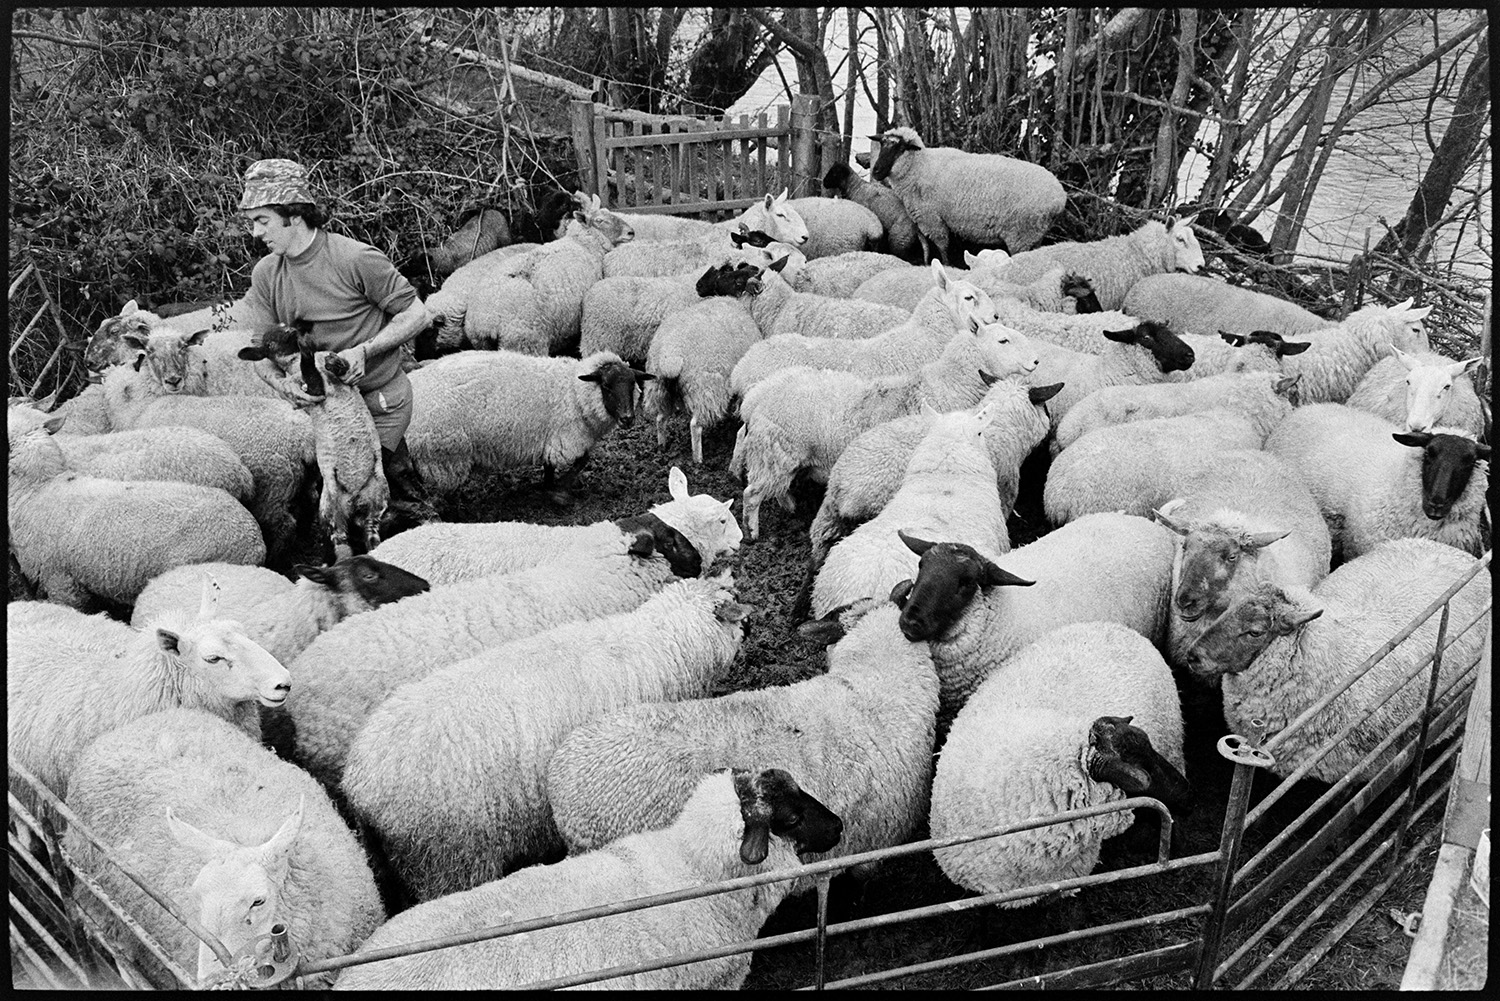 Sorting ewes and lambs in pen and feeding them. 
[Graham ward sorting lambs and ewes in a pen by a river at Parsonage, Iddesleigh.]